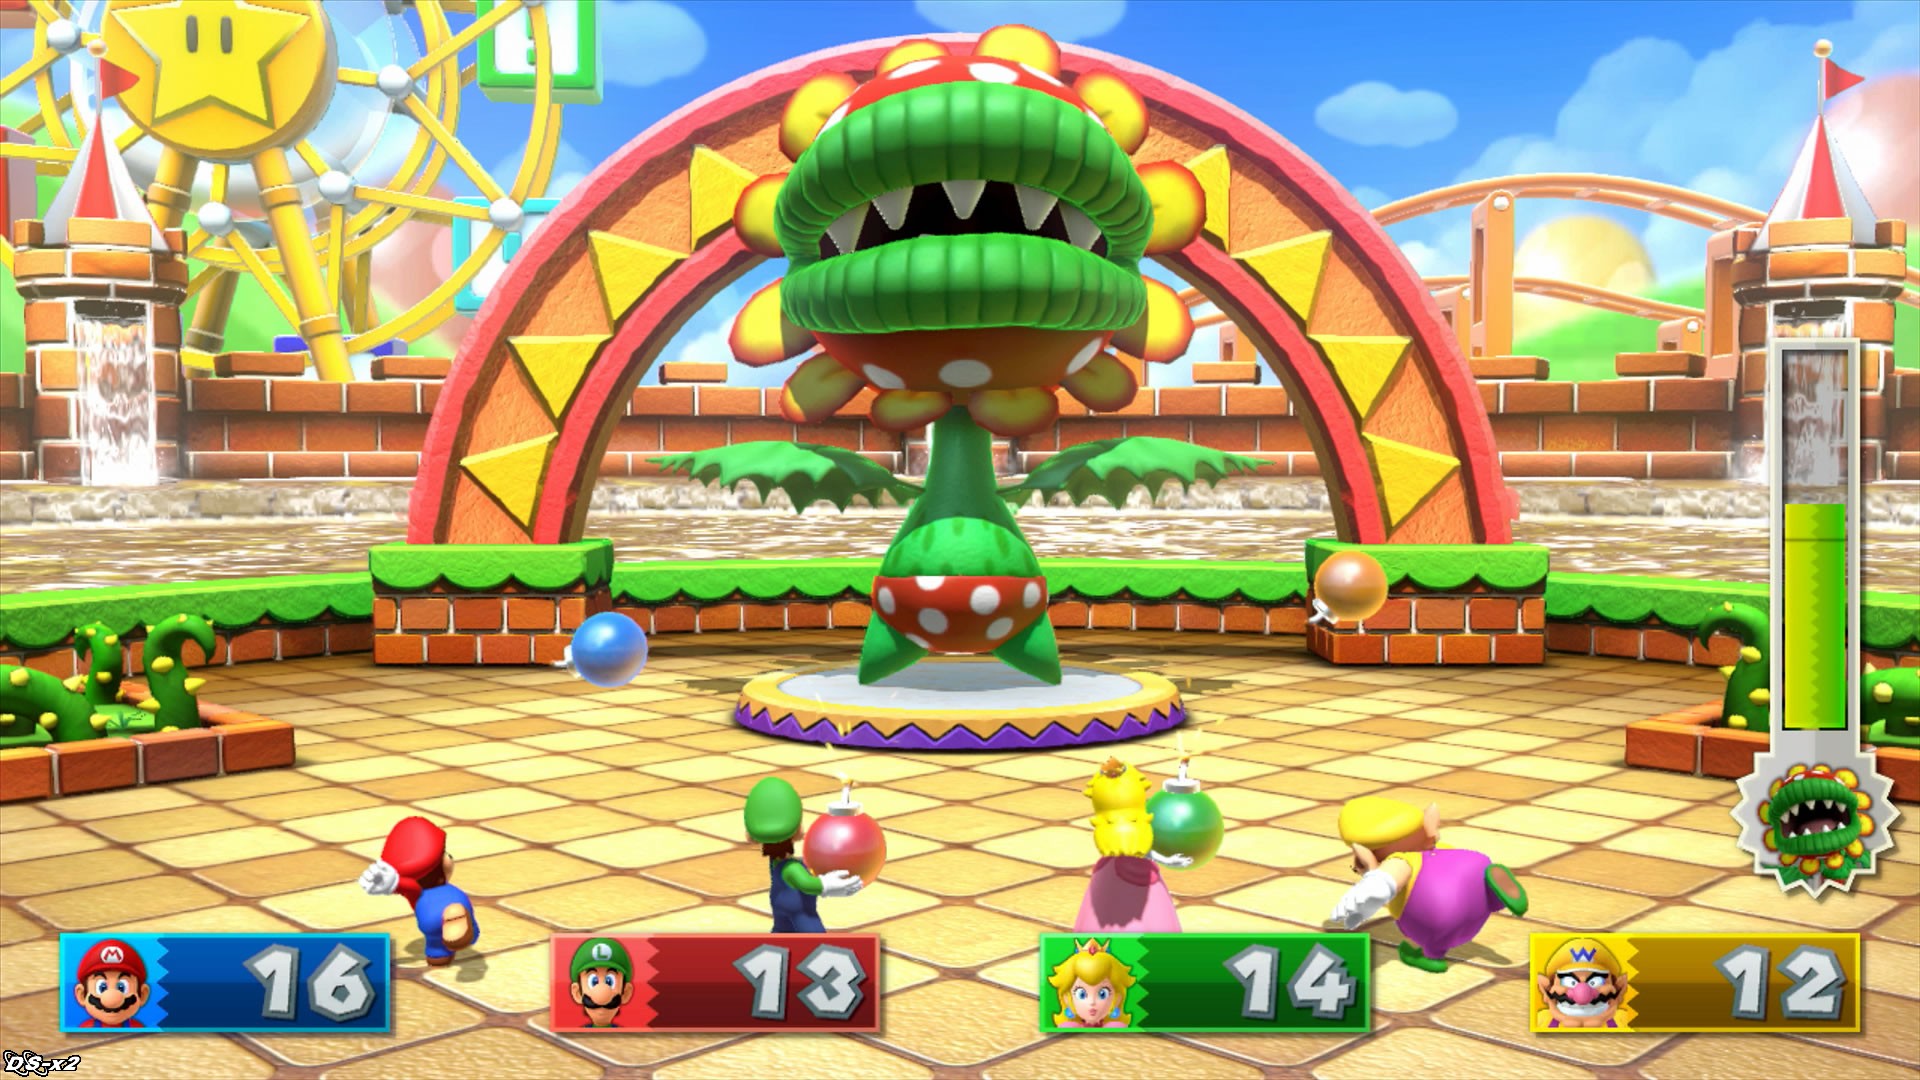 Screenshots of Mario Party 10 for Wii U